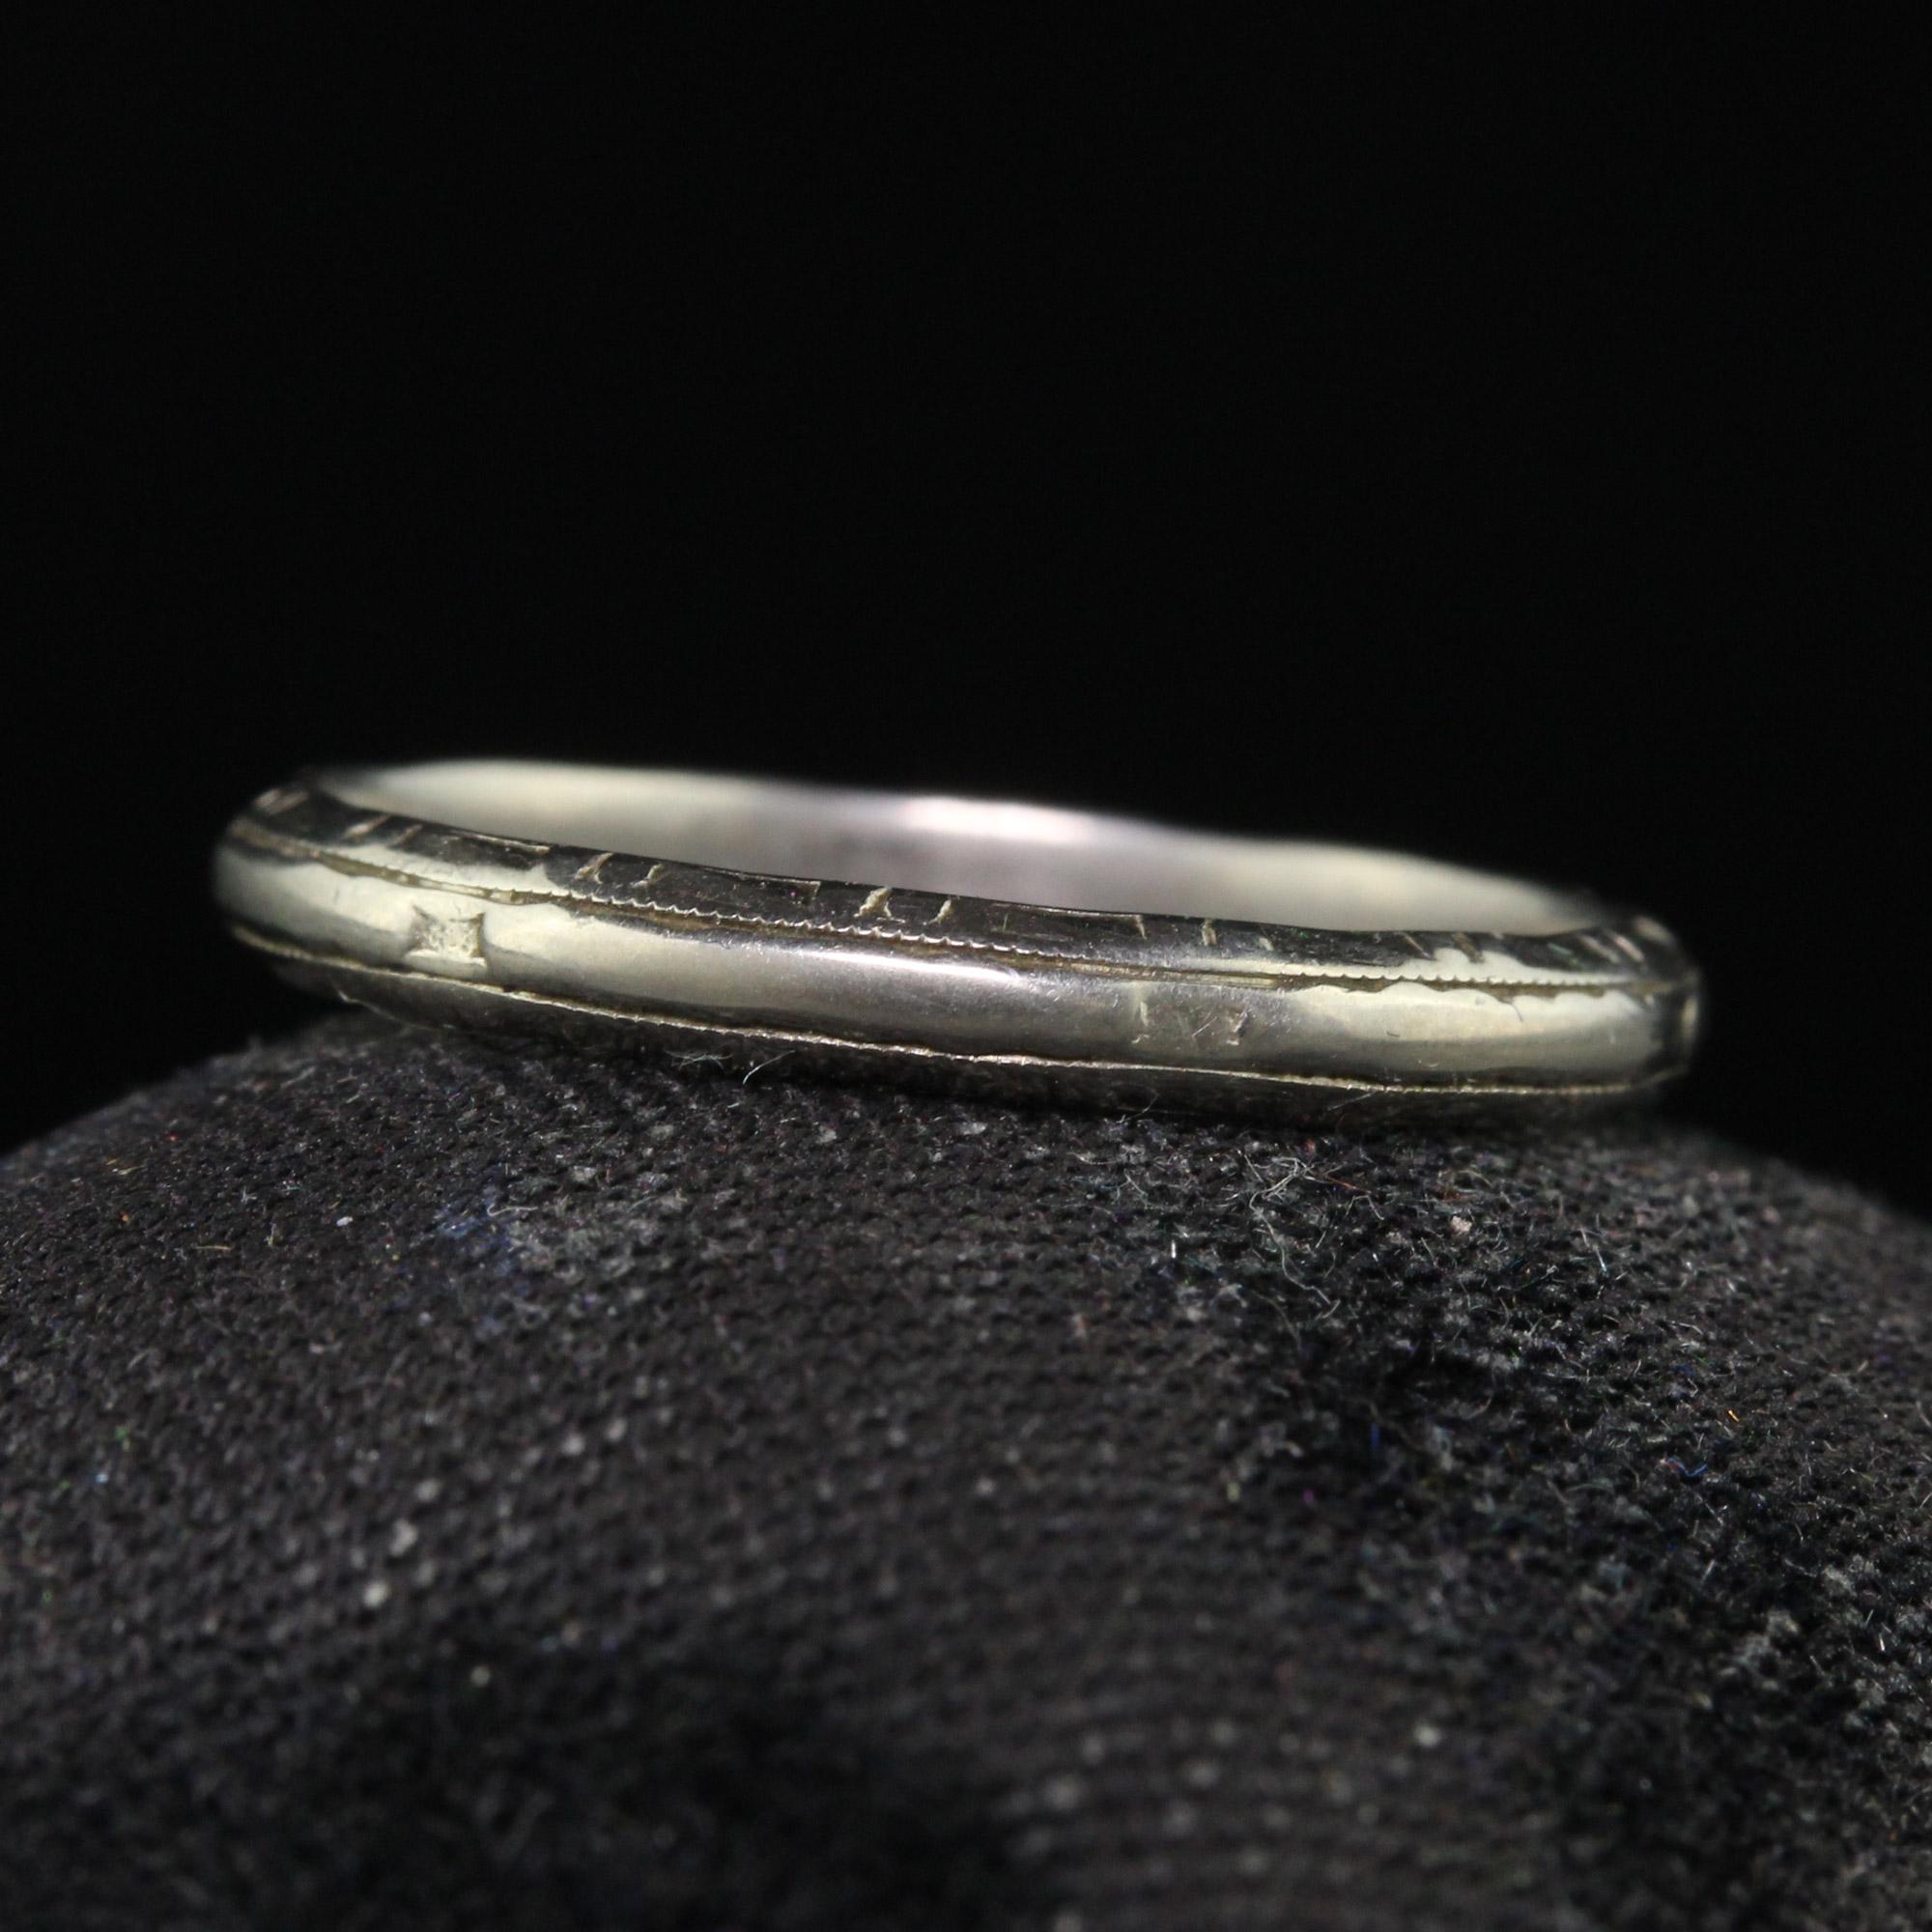 Beautiful Antique Art Deco 18K White Gold Classic Engraved Wedding Band - Size 6. This classic wedding band is crafted in 18k white gold. The sides of the band are engraved and they go around the entire ring on both sides. The top has a rounded